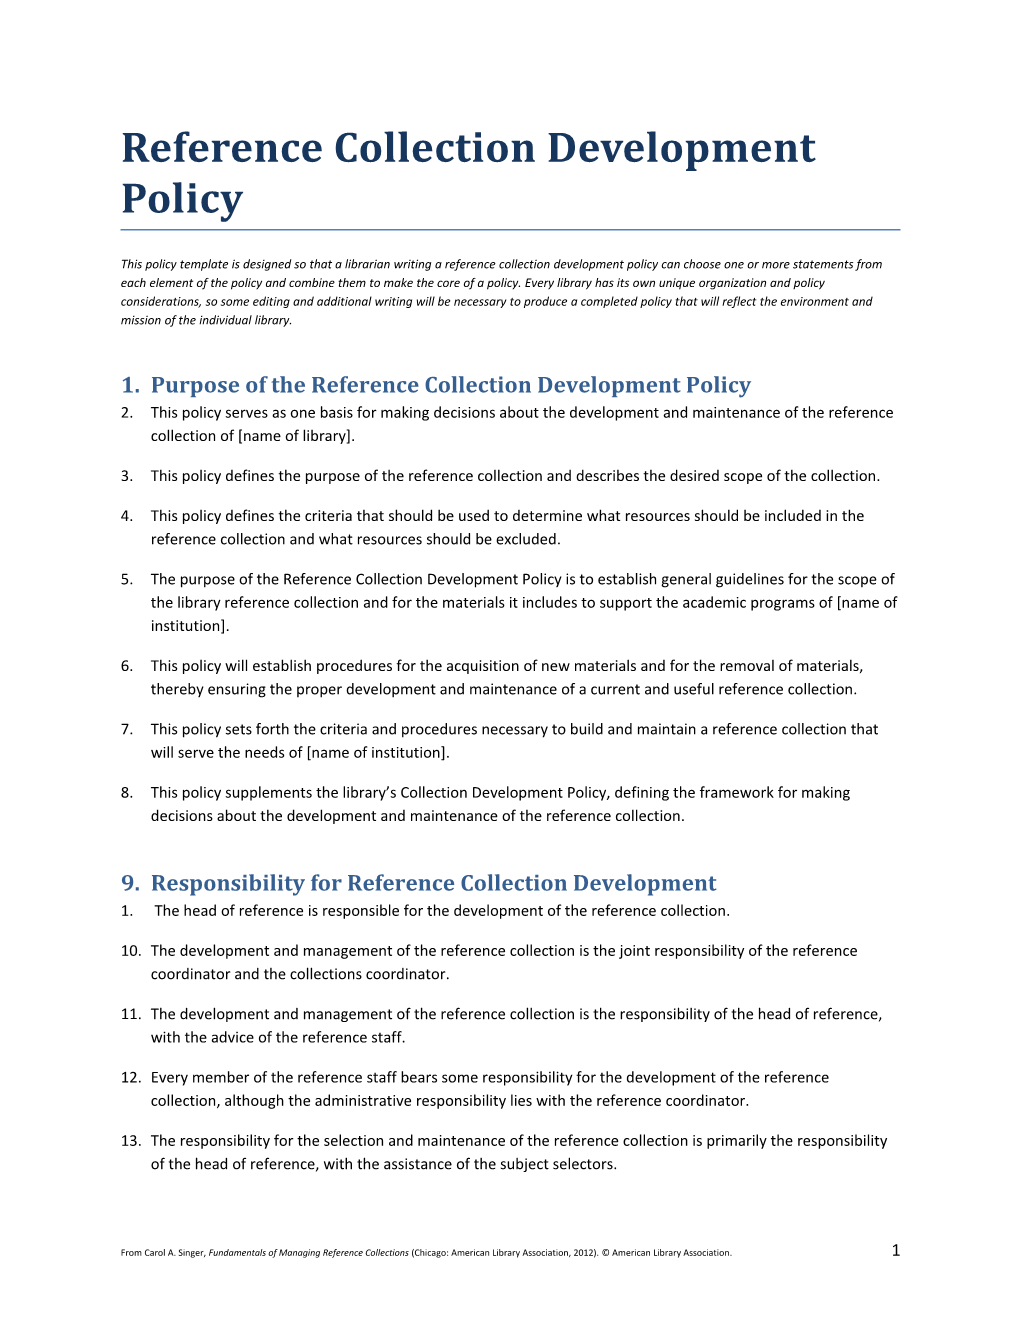 Purpose of the Reference Collection Development Policy